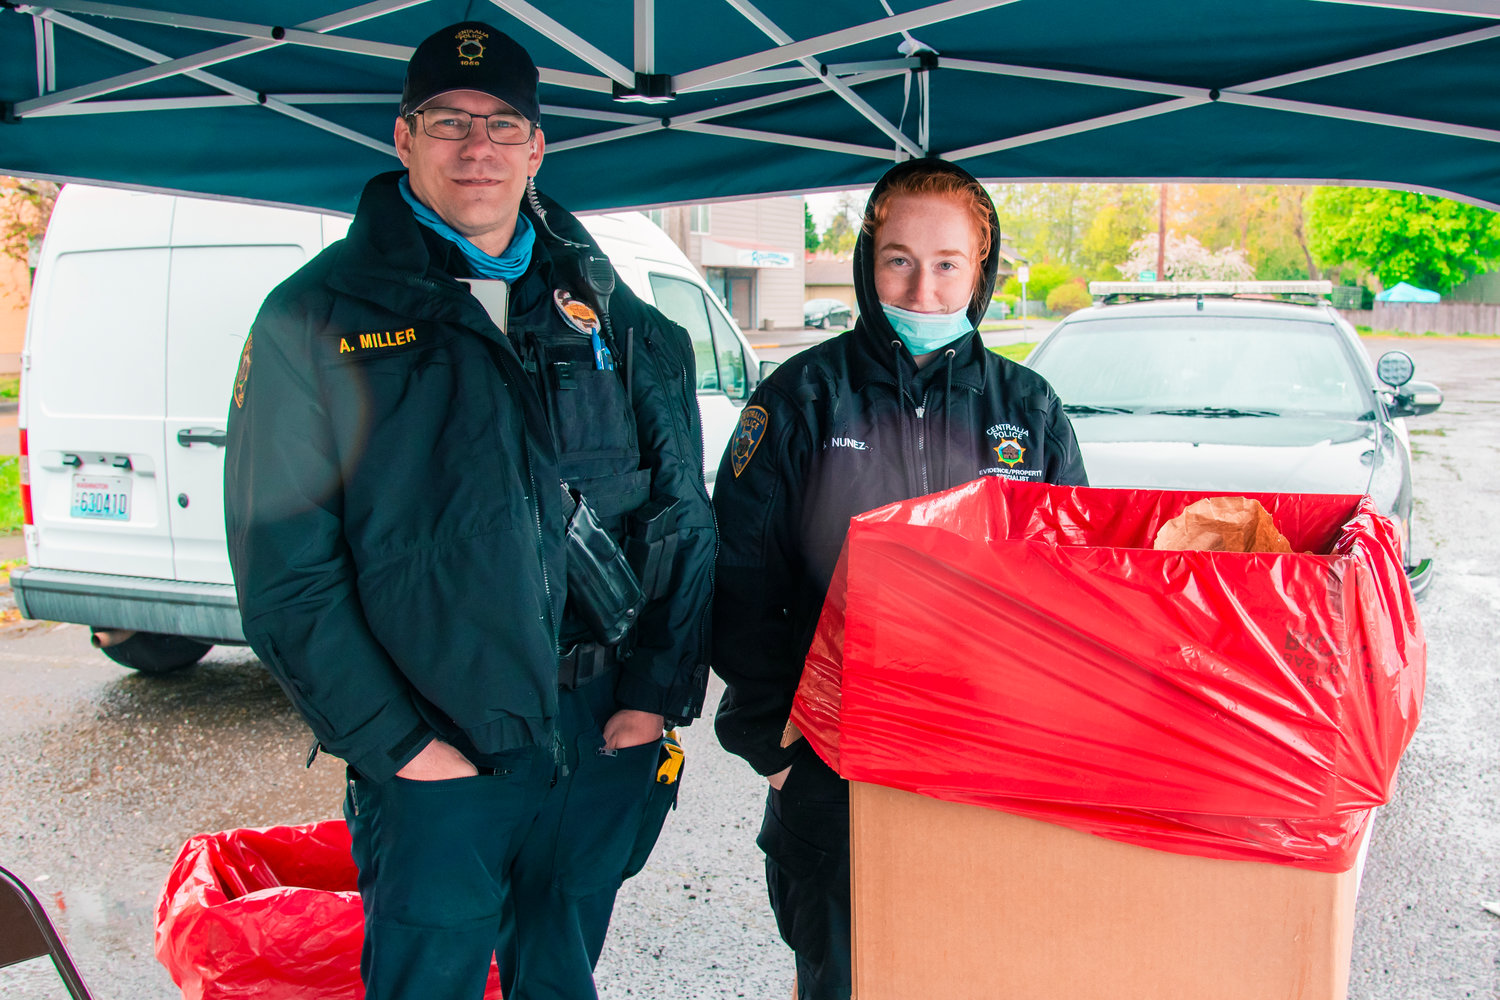 Saturday was the 20th annual National Drug Take-Back Day, and locals had the opportunity to drop off unused or expired medications at the Centralia event, no questions asked. The event was hosted by the Centralia Prevention Coalition. It took place from 10 a.m. to 2 p.m. across from city hall.